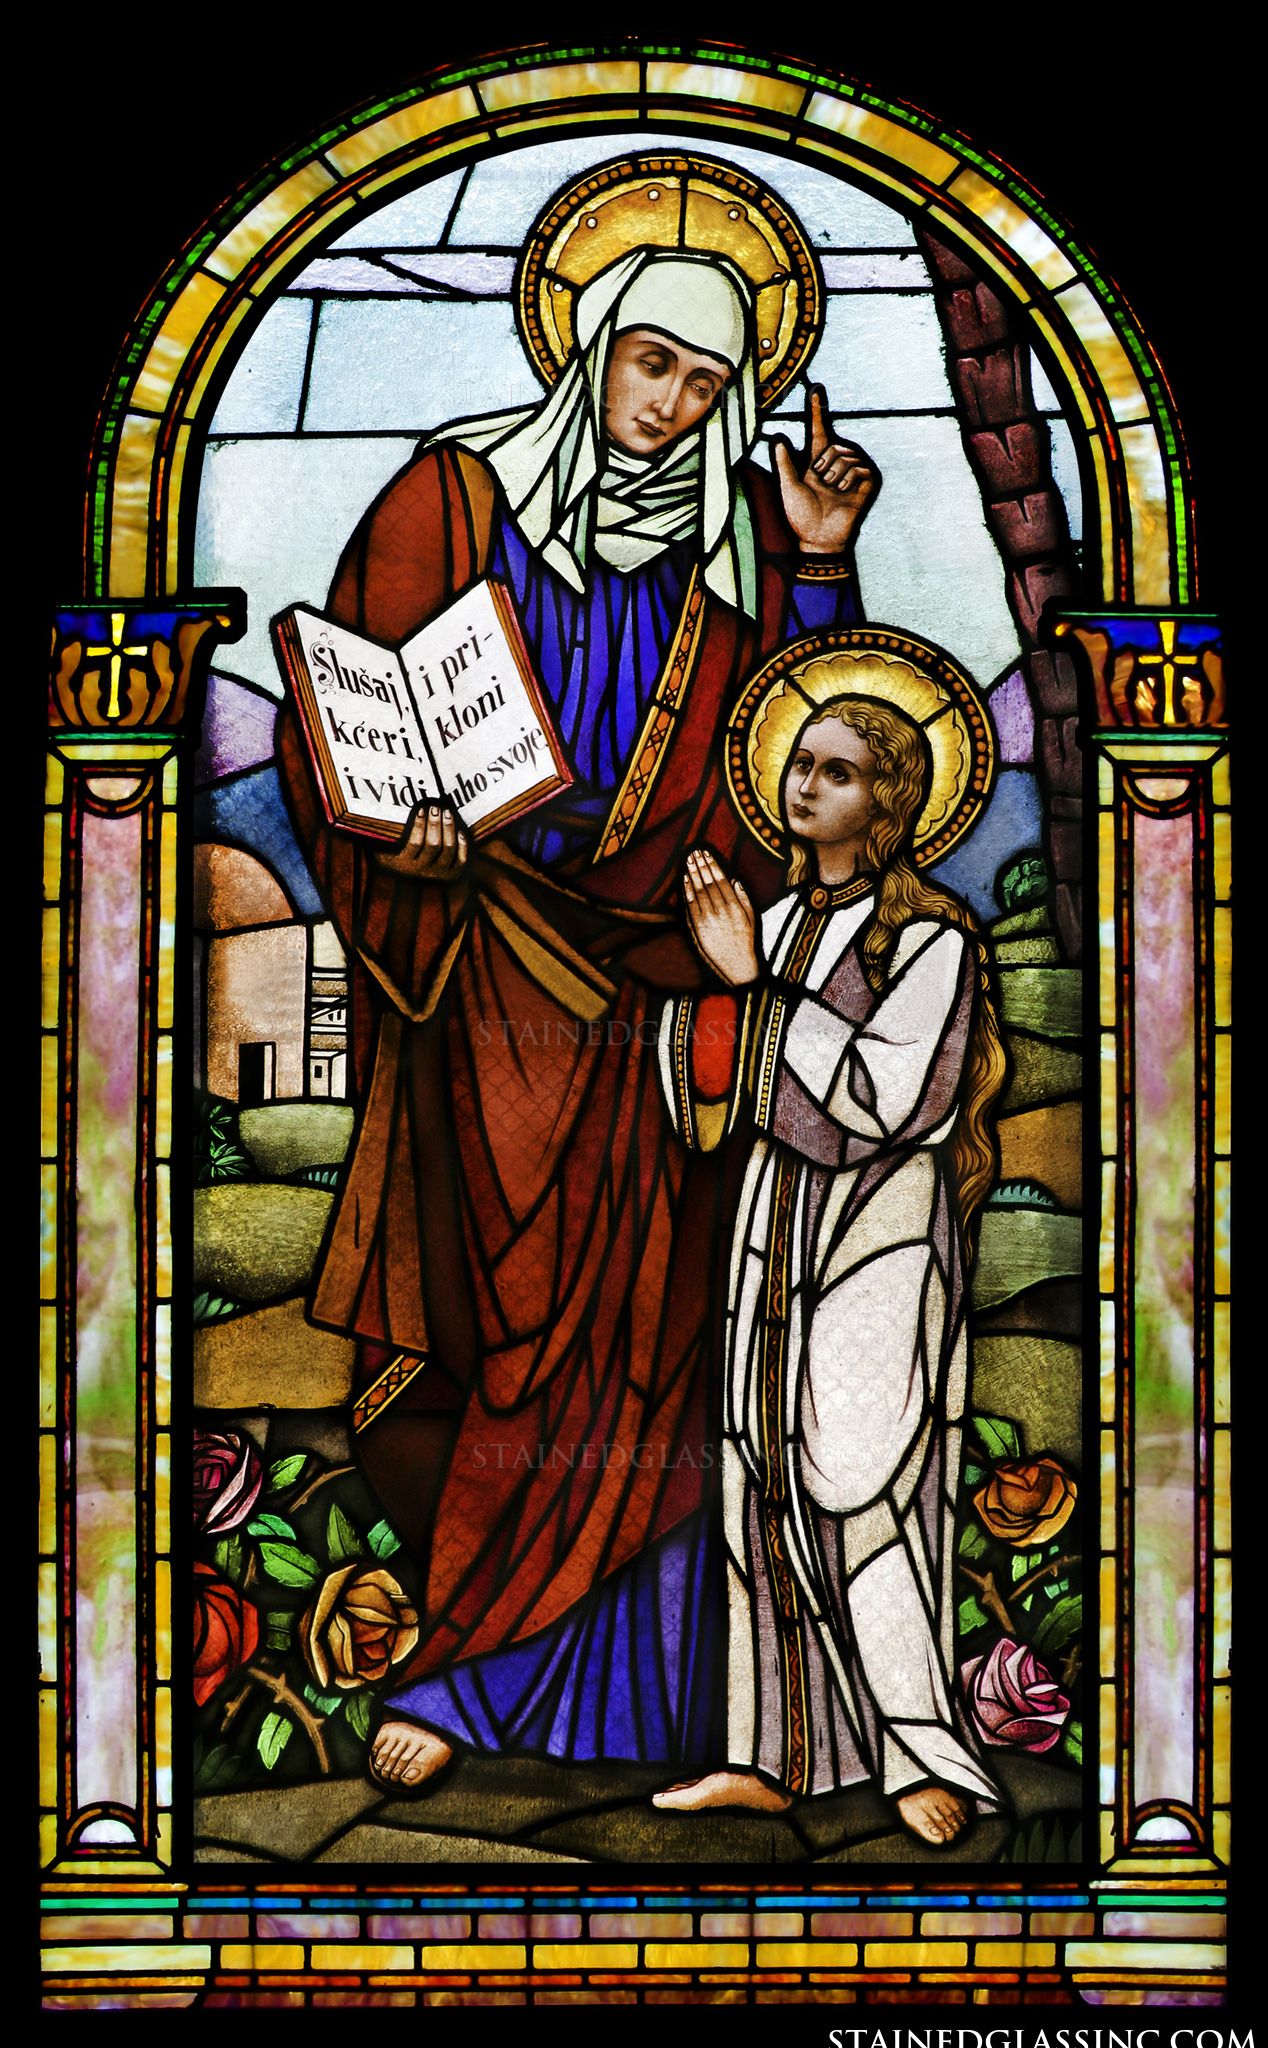 "St. Anne Teaching Virgin Mary" Religious Stained Glass Window